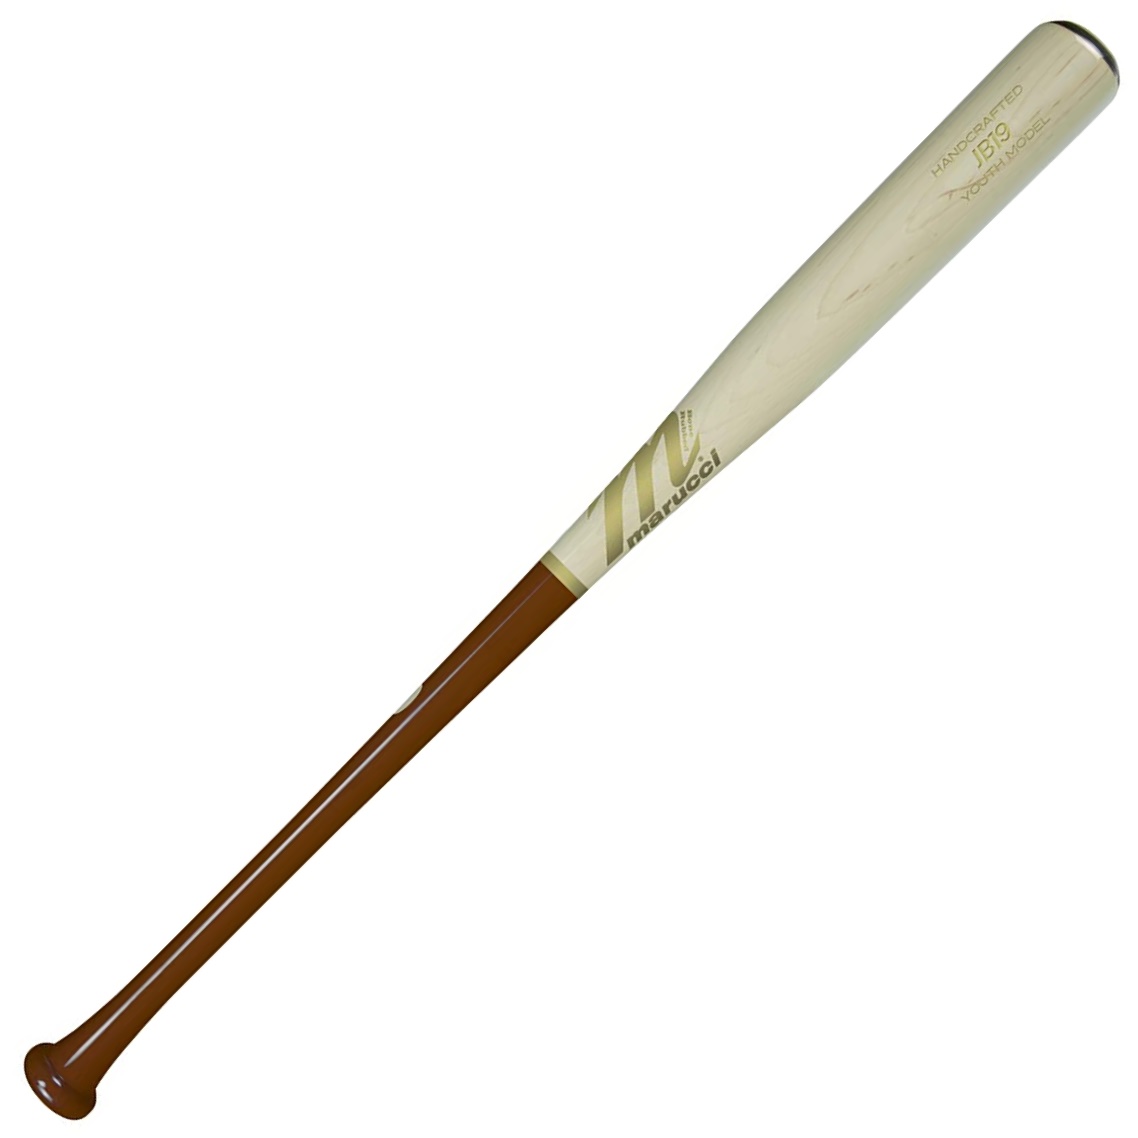 marucci-jb19-pro-youth-maple-youth-wood-baseball-bat-29-inch MYVE2JB19-WTWW-29 Marucci 840058700992 he versatile bat for the versatile hitter. We know your kind.